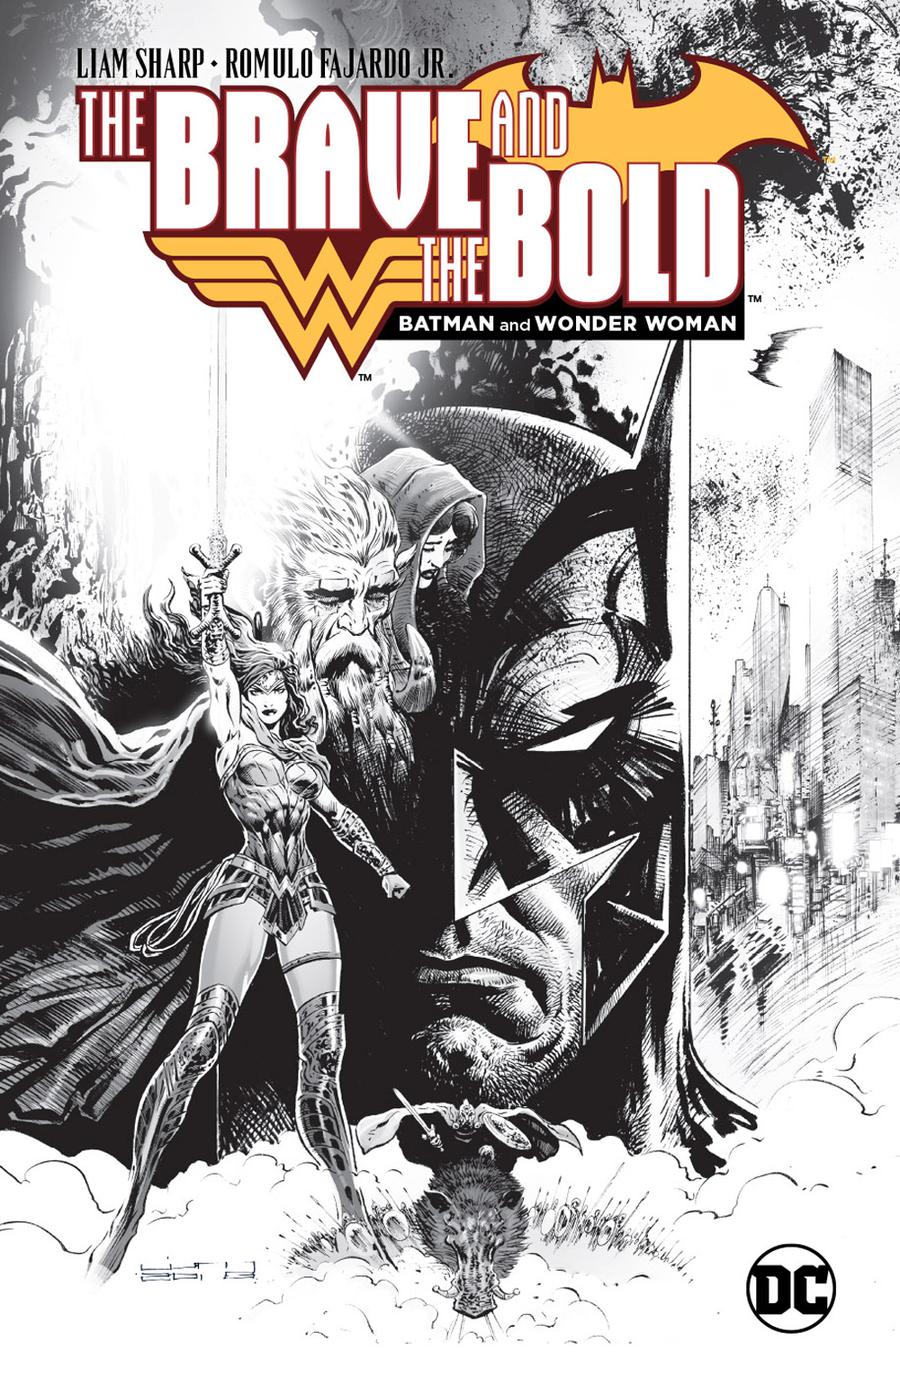 LCSD 2018 Brave And The Bold Batman And Wonder Woman HC